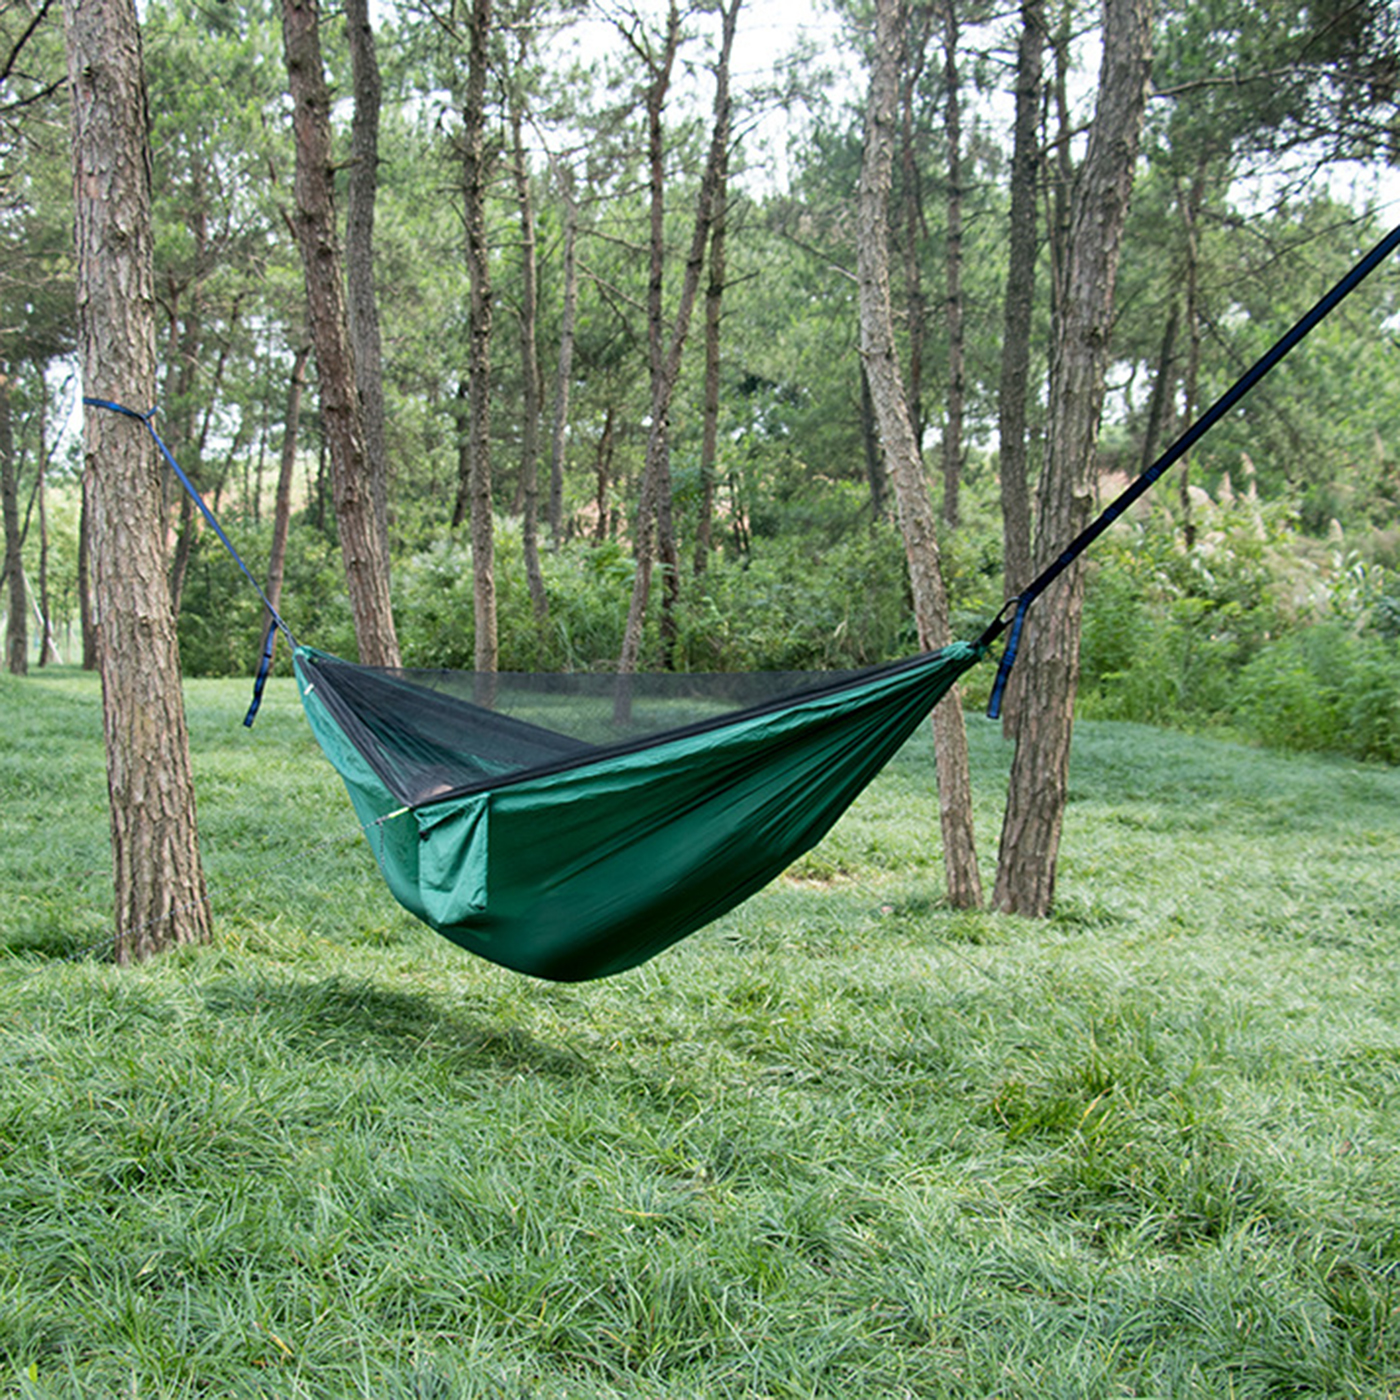 Camping Hammock With Mosquito Net2